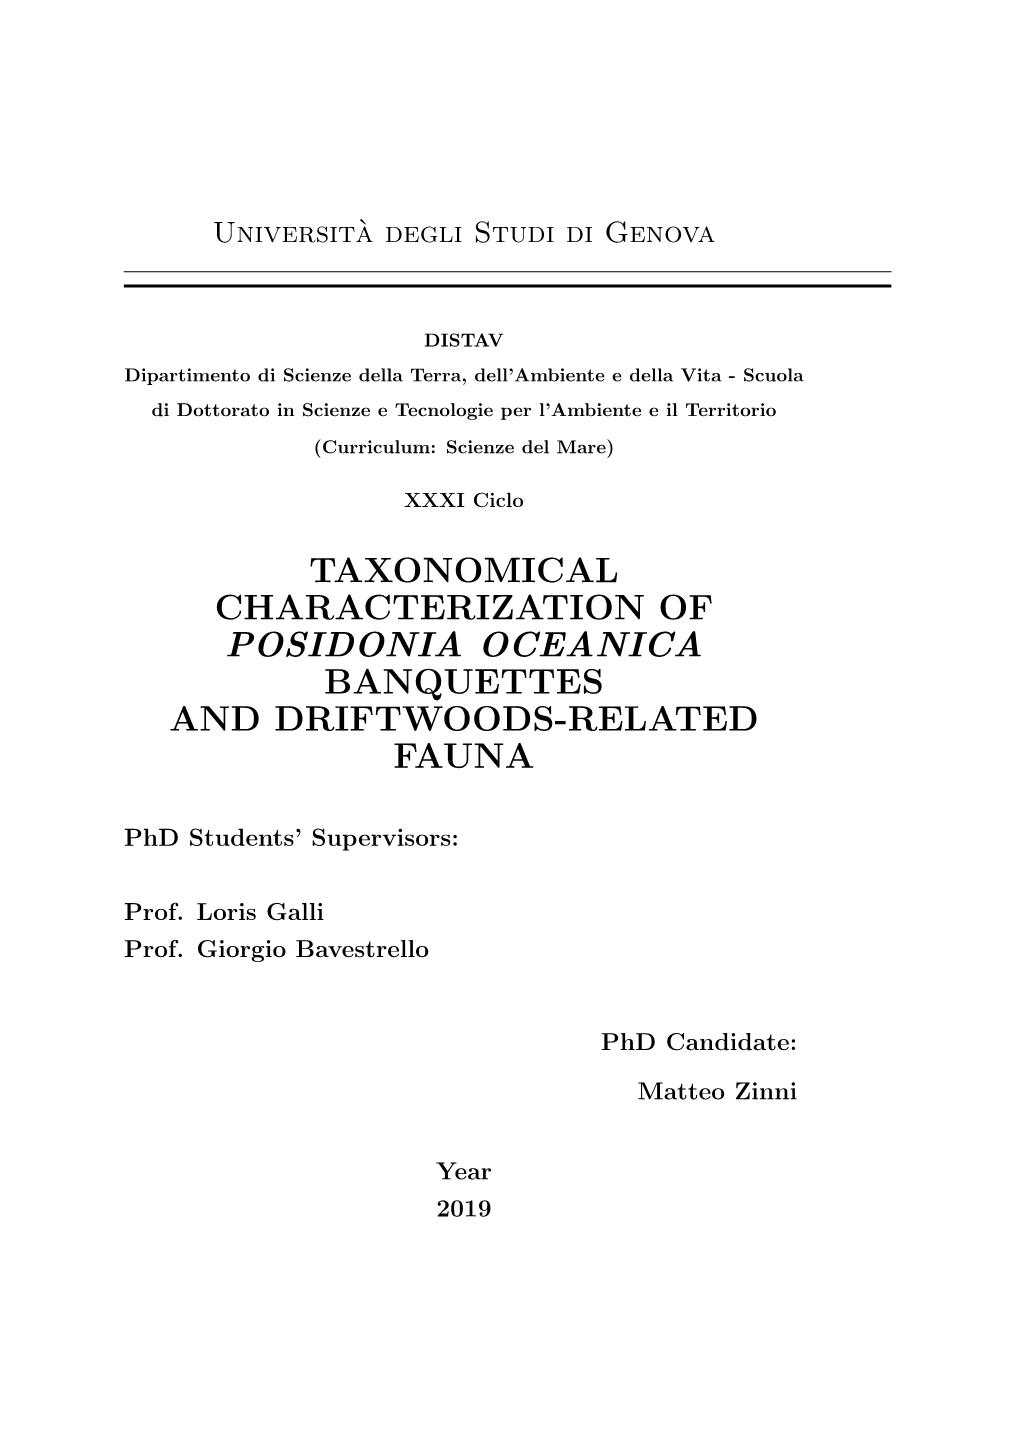 Taxonomical Characterization of Posidonia Oceanica Banquettes and Driftwoods-Related Fauna